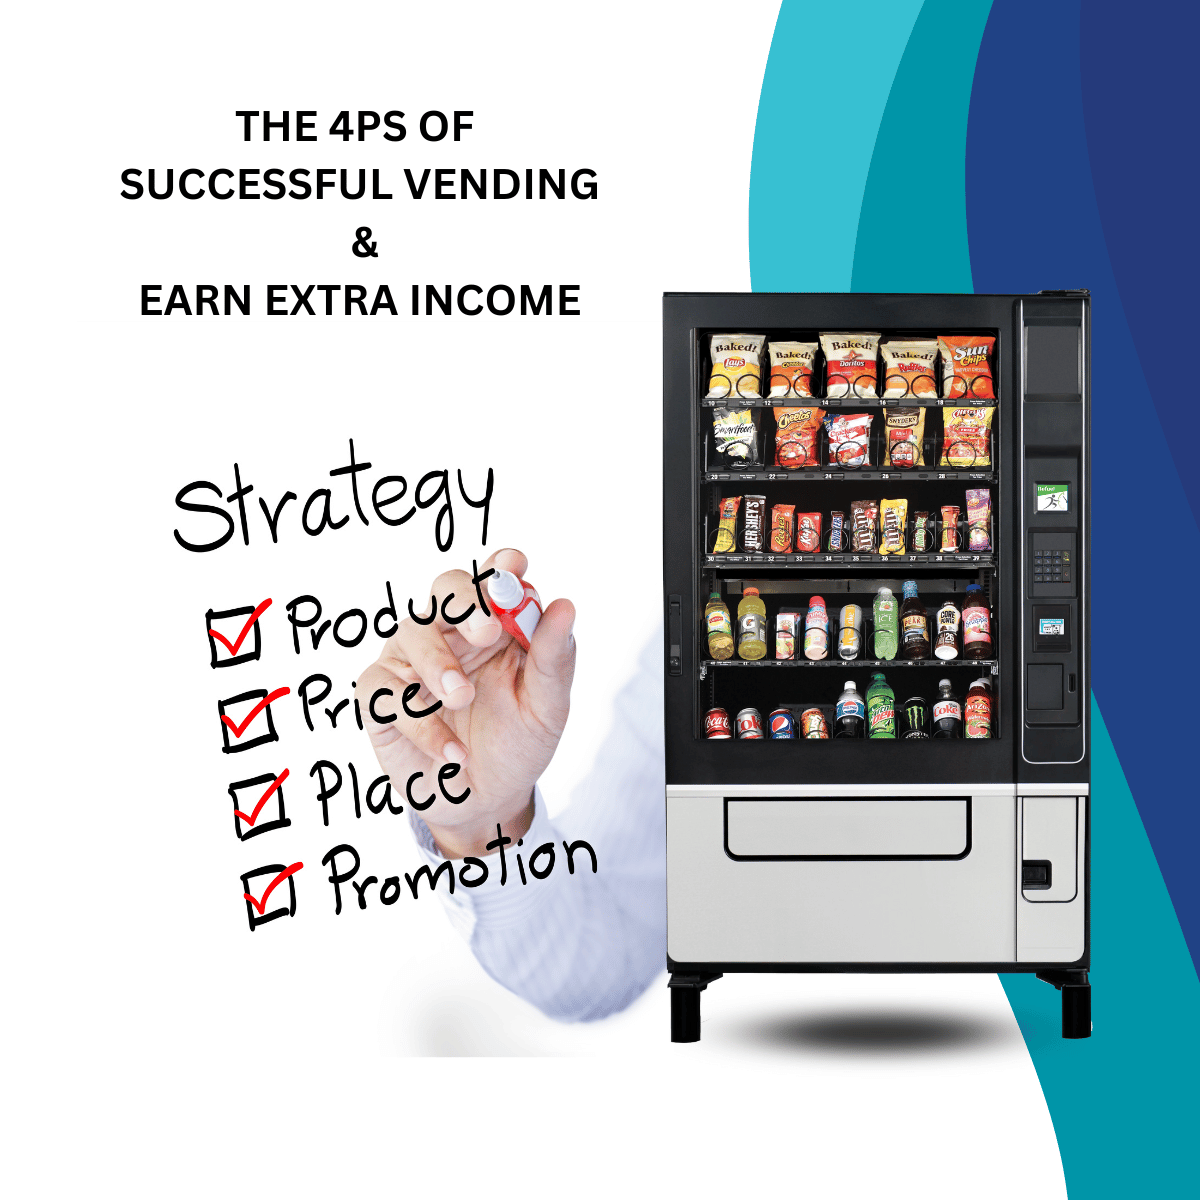 SNACK VENDING MACHINES CAN HELP YOU EARN EXTRA INCOME